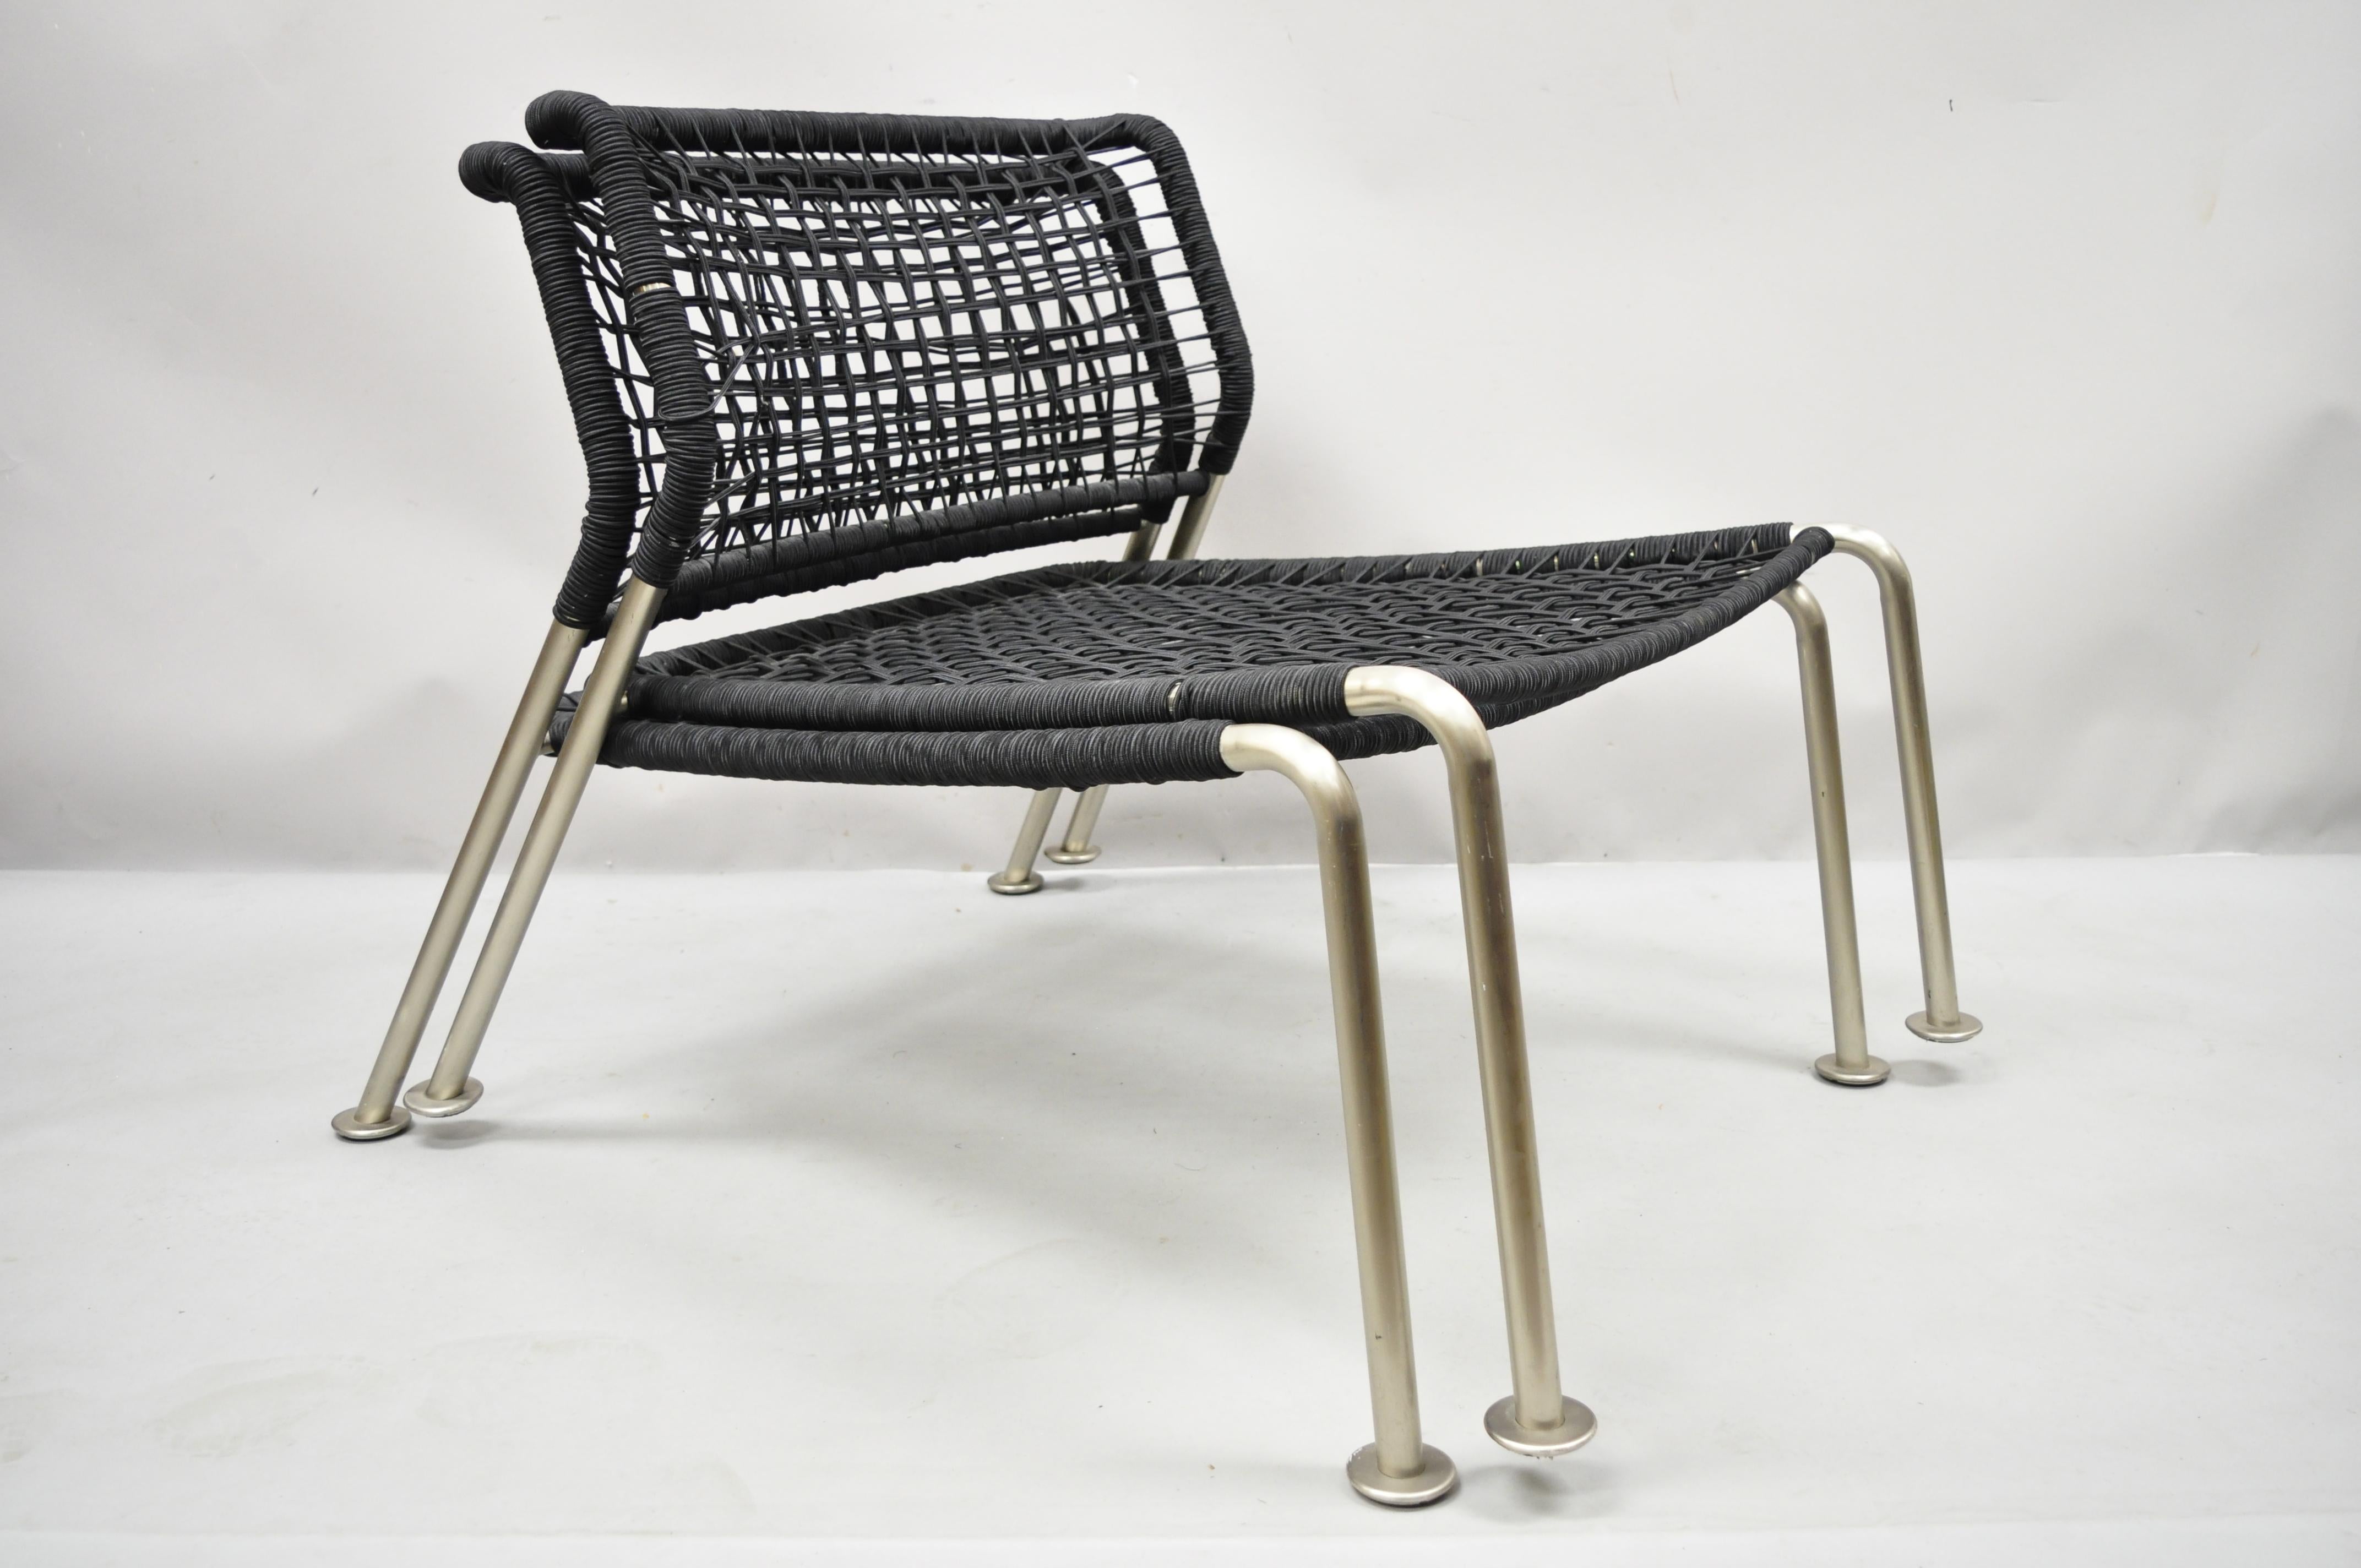 Modern brushed steel low wide frame vinyl rope lounge slipper chairs - a pair. Item features low and wide brushed steel frames, woven vinyl rope seat and back, stackable design, clean modernist lines. Circa Late 20th - Early 21st Century.